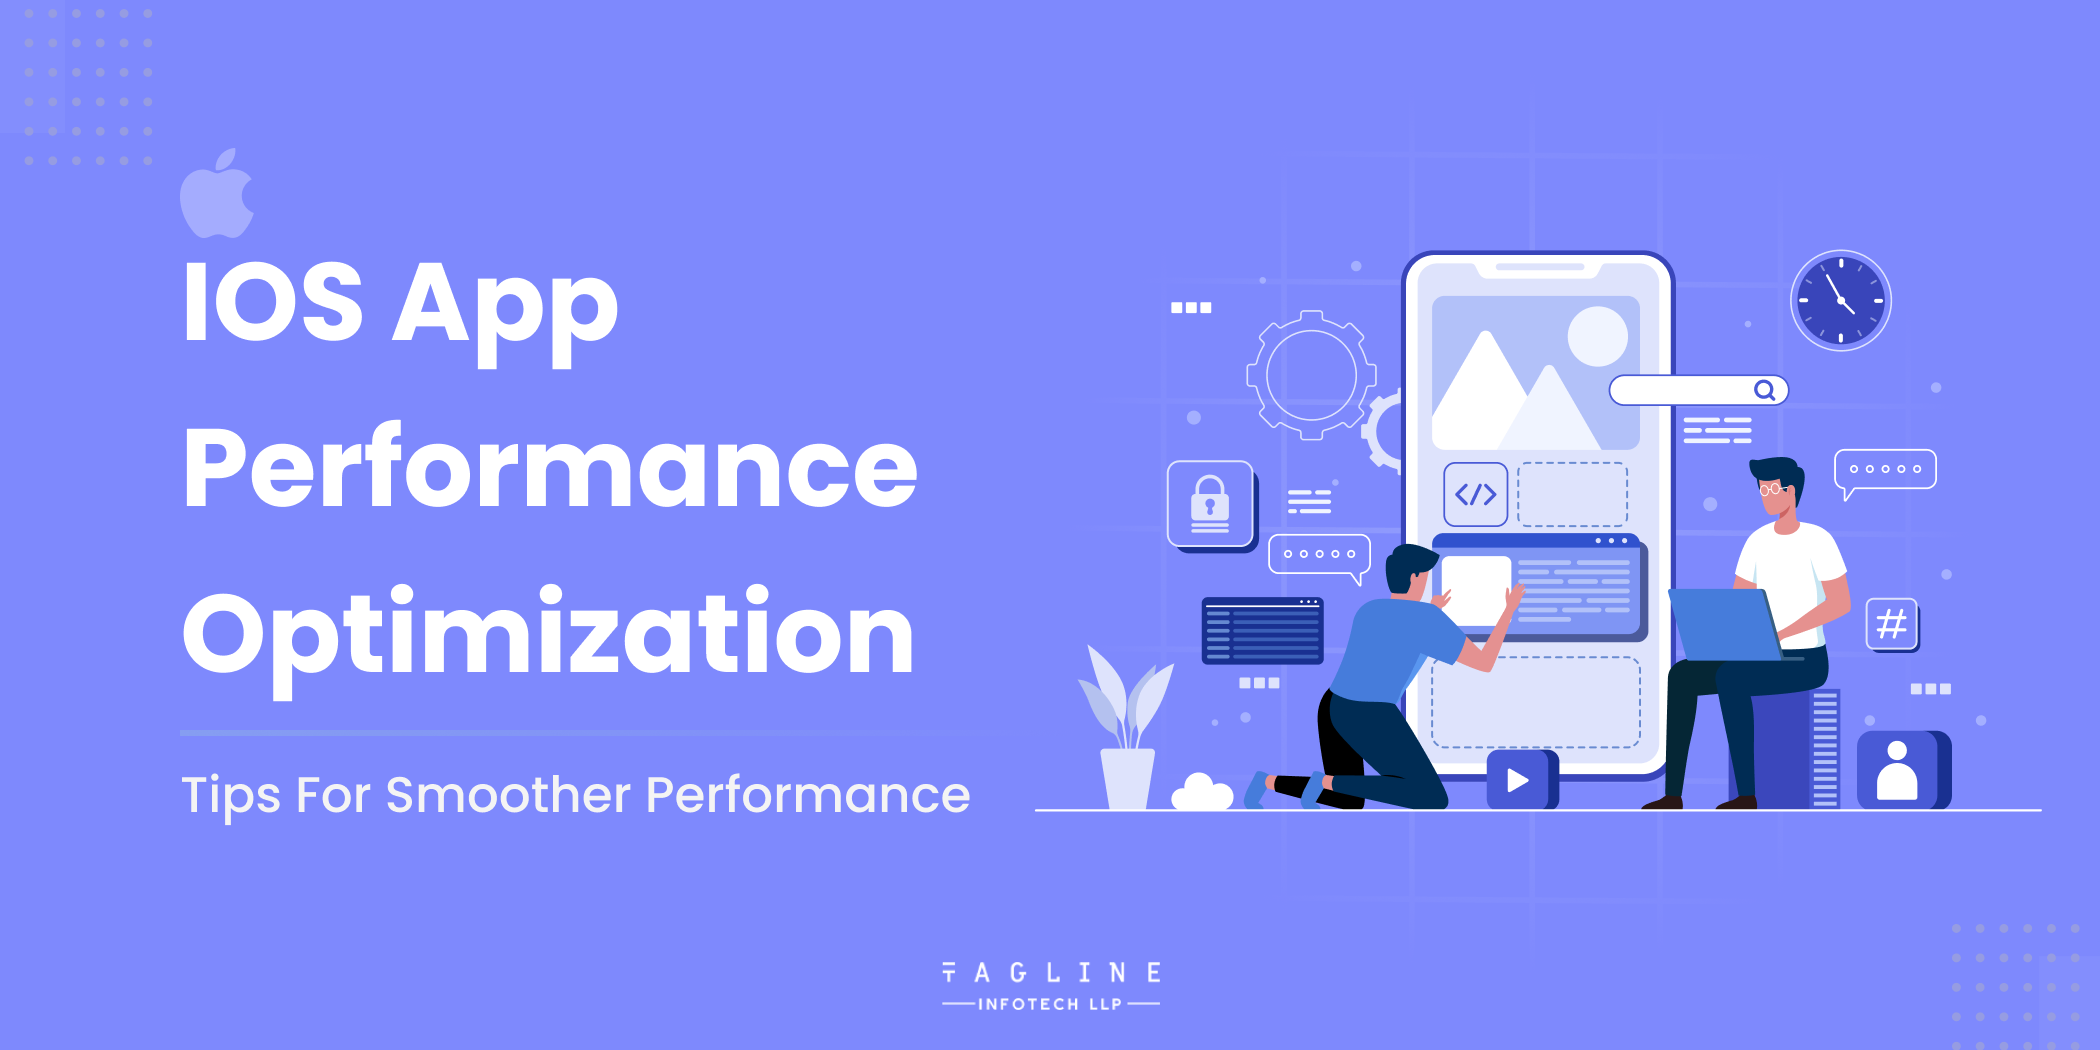 iOS App Performance Optimization Tips for Smoother Performance